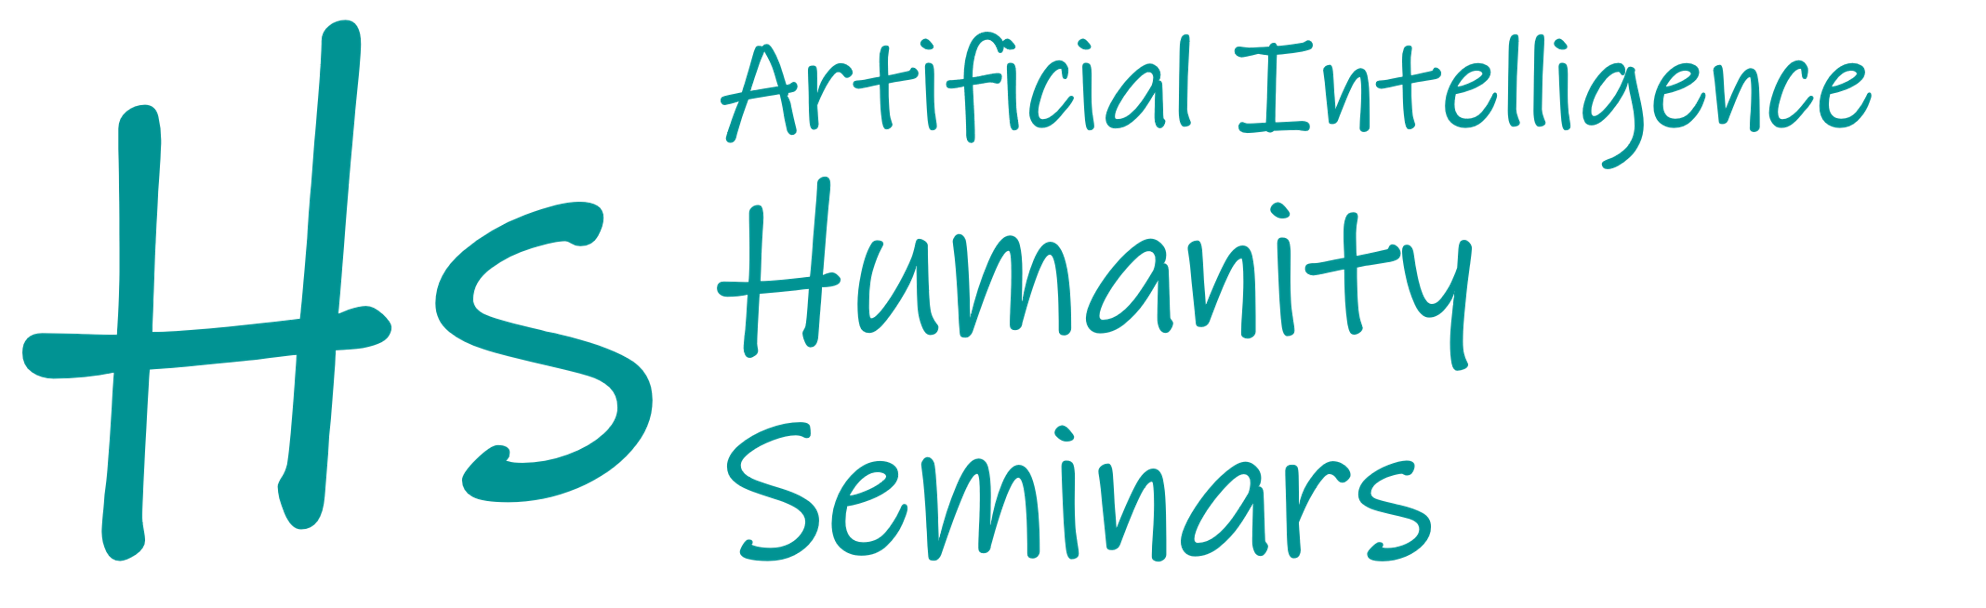 Humanities in Artificial Intelligence